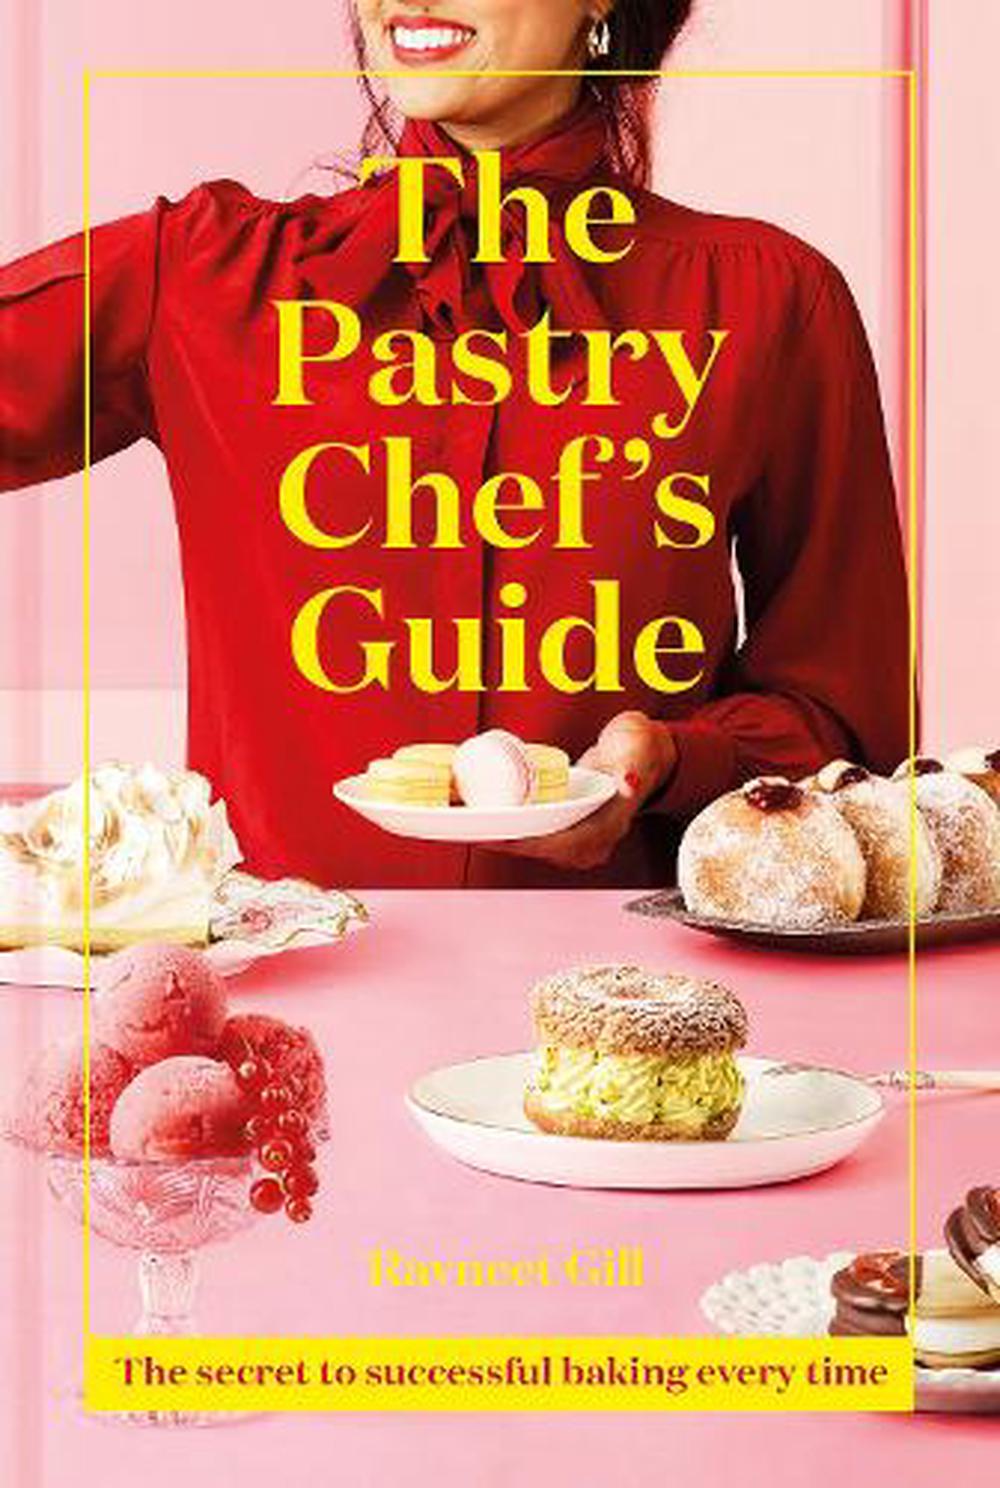 Pastry Chef S Guide By Ravneet Gill Hardcover 9781911641513 Buy Online At The Nile